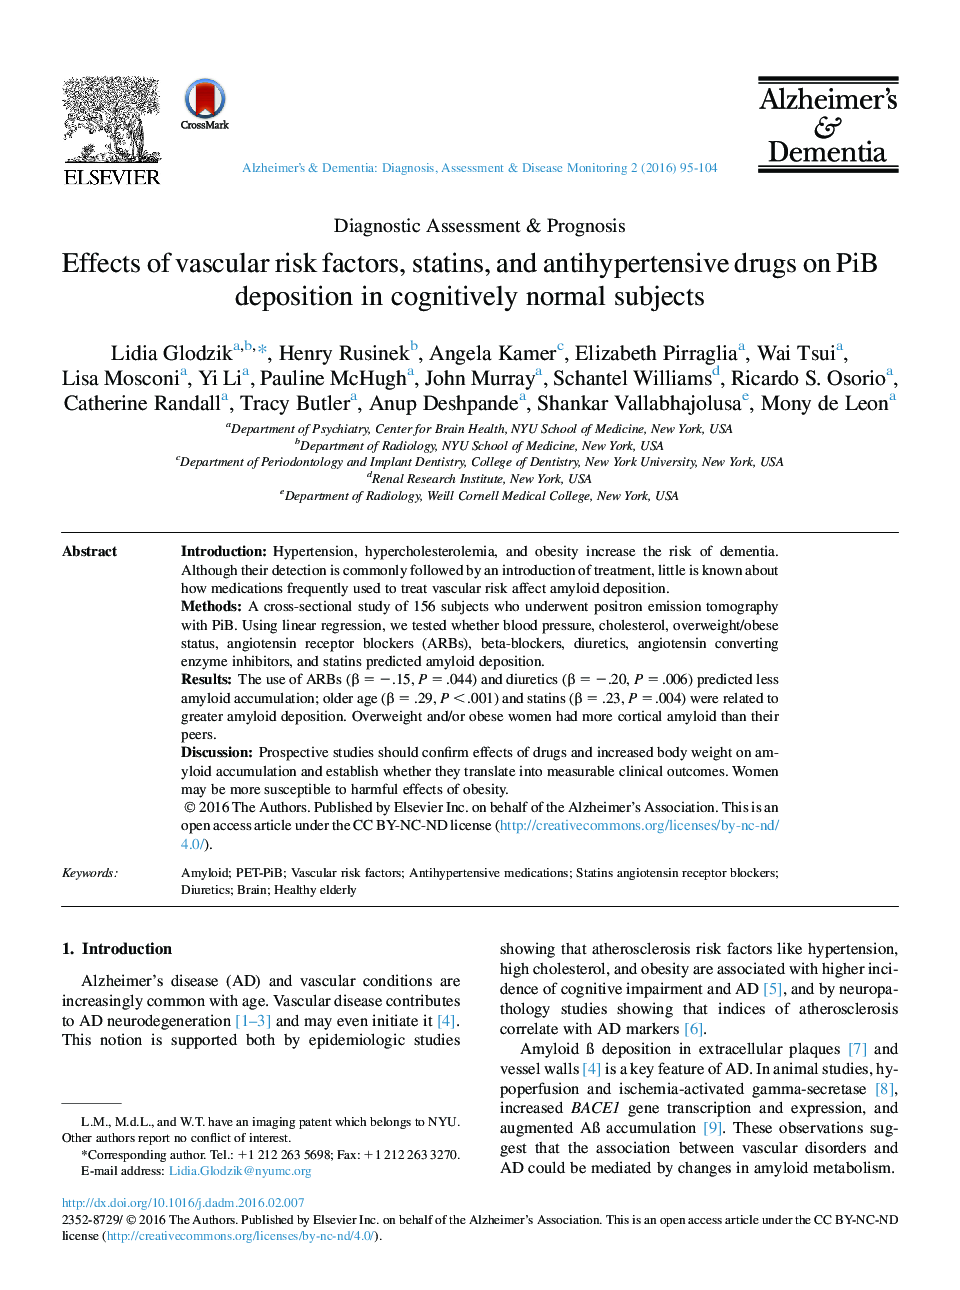 Effects of vascular risk factors, statins, and antihypertensive drugs on PiB deposition in cognitively normal subjects 